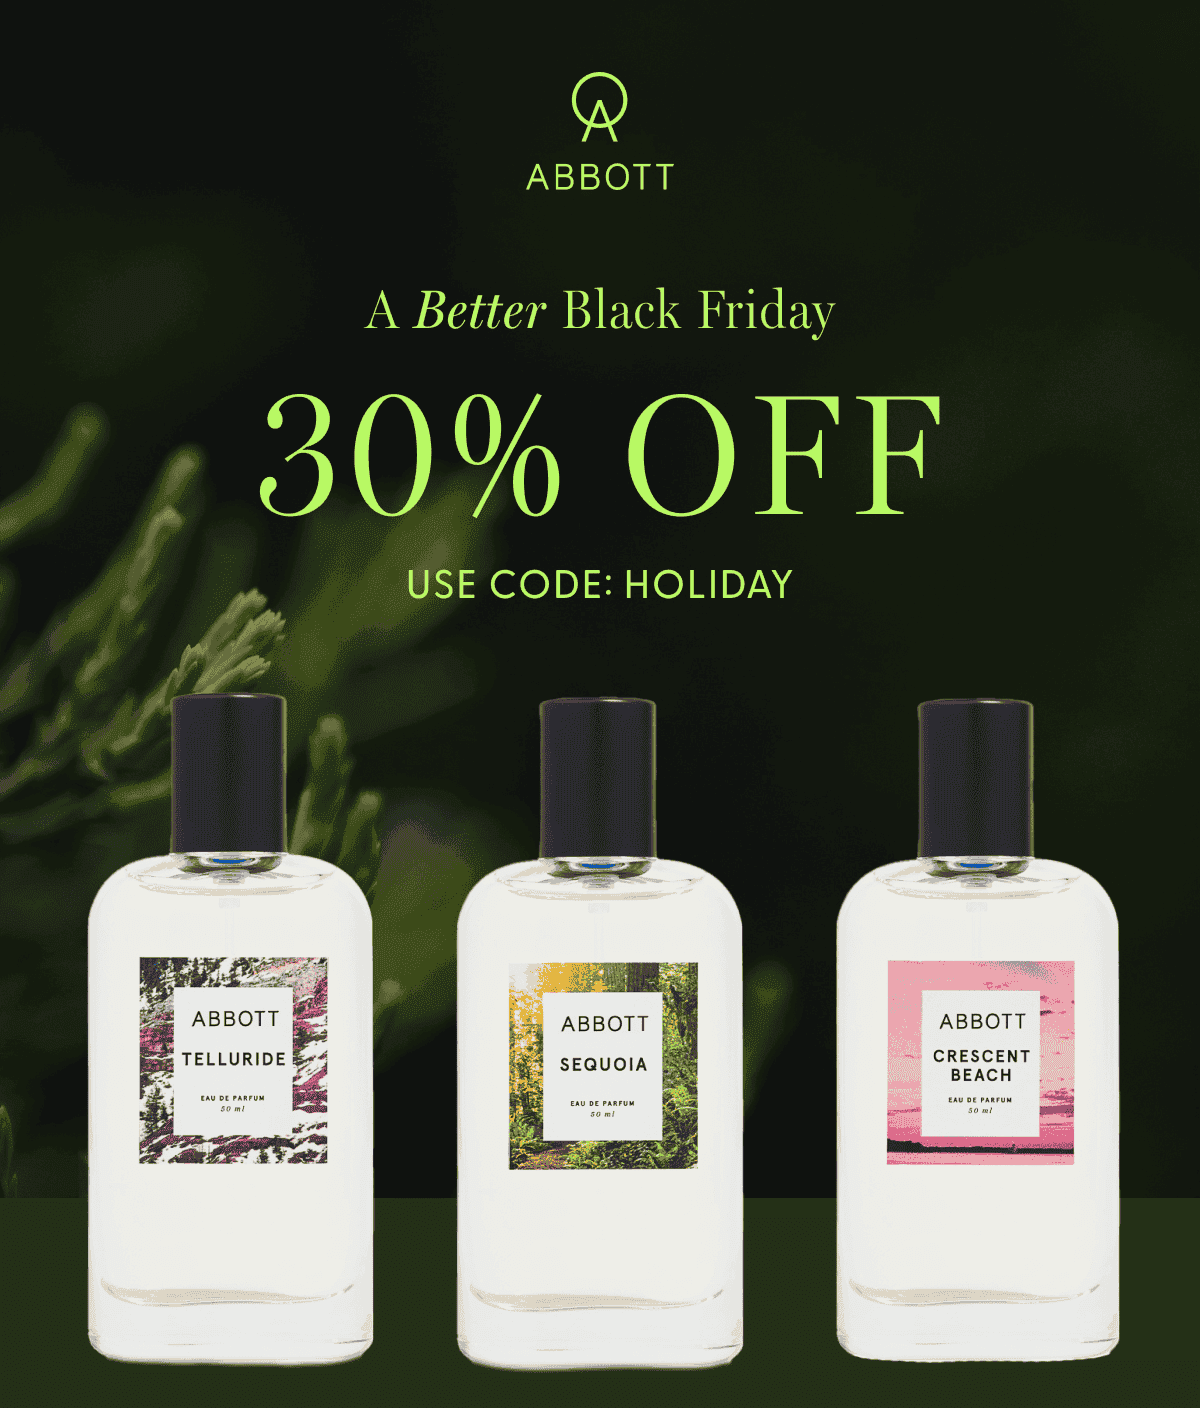 A Better Black Friday: 30% Off